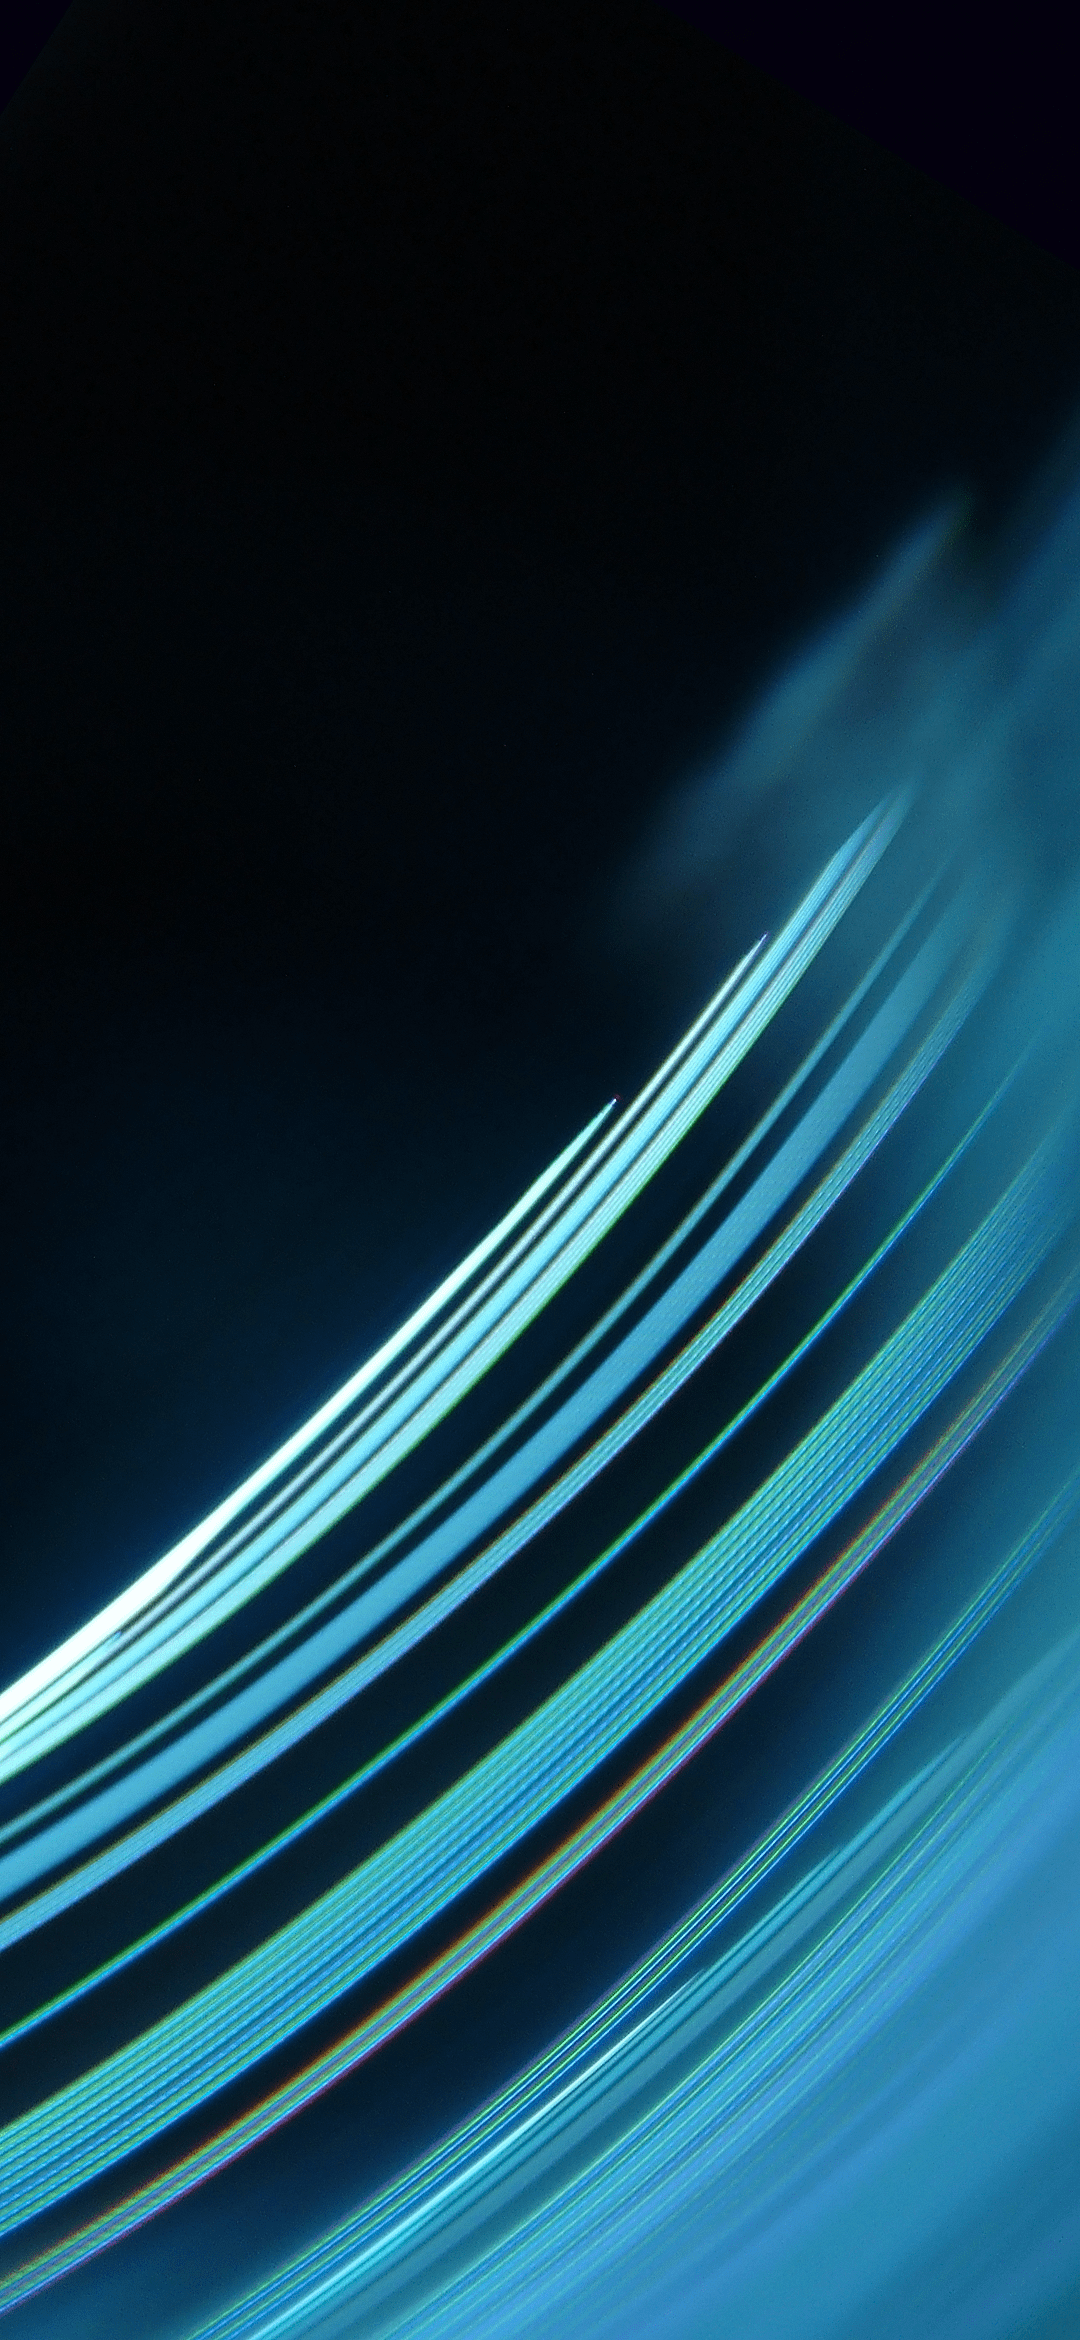 Android Oneplus 7 Pro Wallpaper